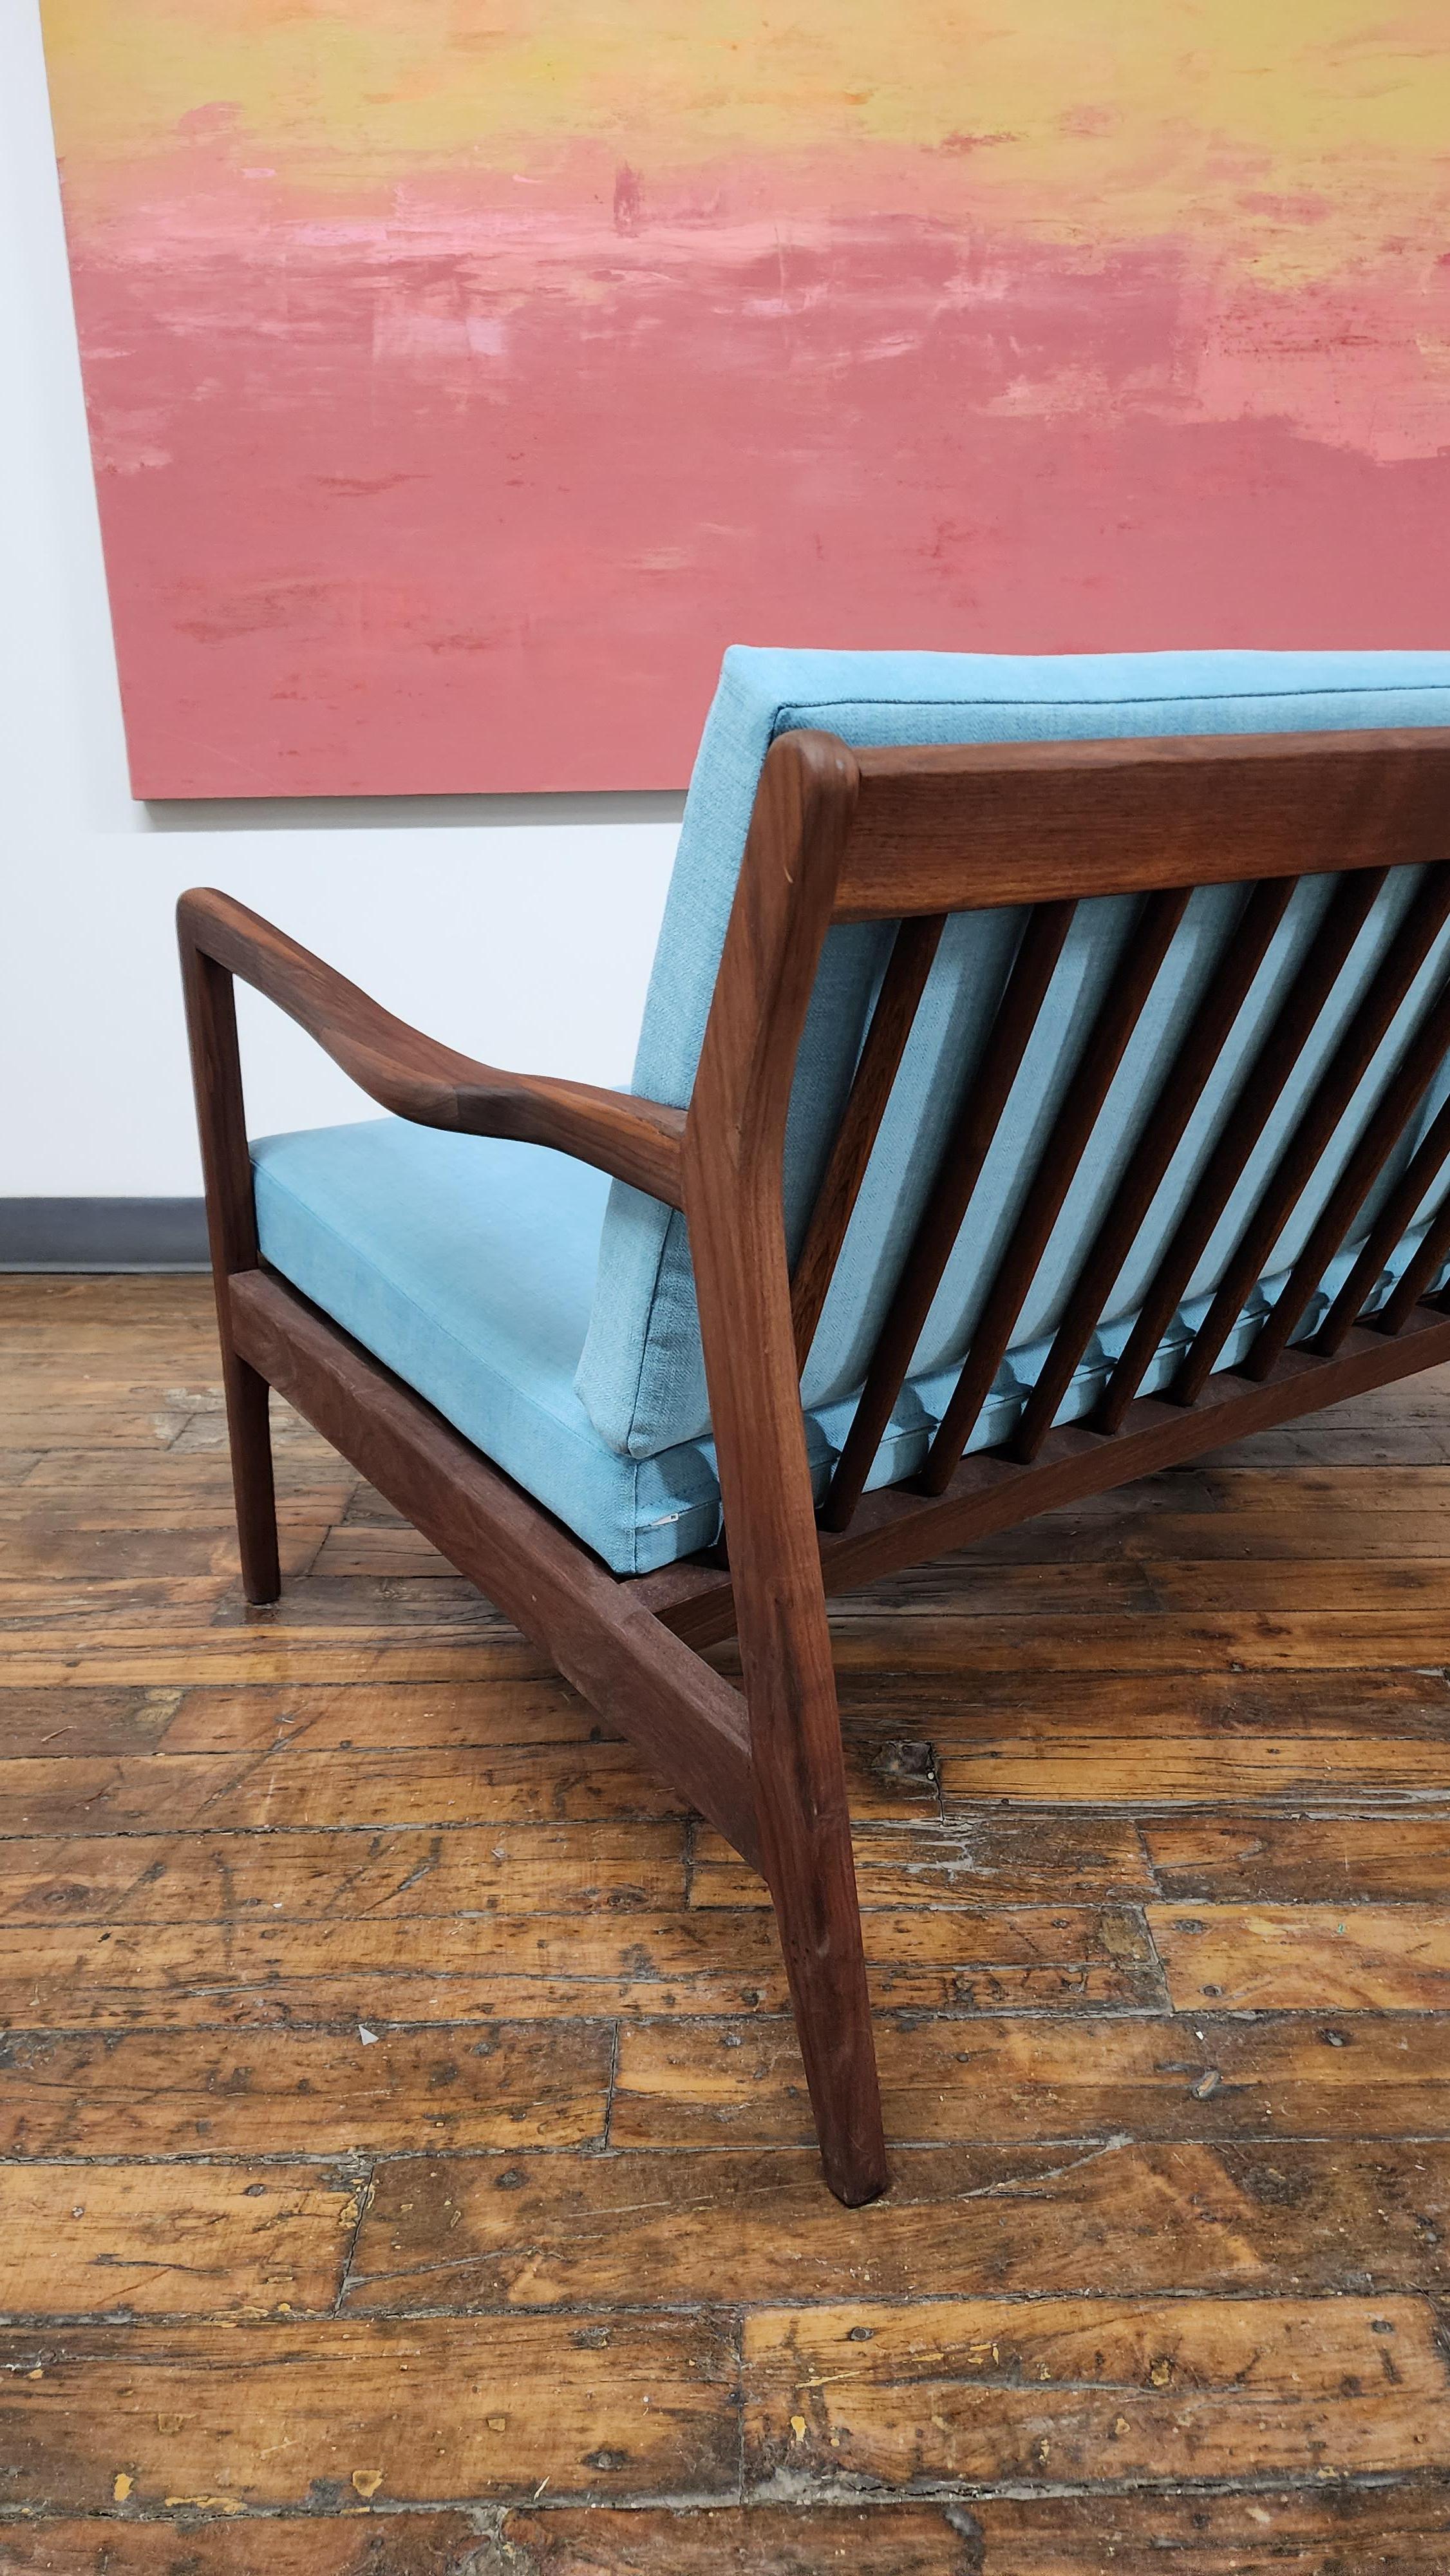 Beautiful walnut frame loveseat sofa in the style of Ib Kofod Larsen.  Features a refinished walnut frame with new webbing and fresh blue upholstery.   Its a classic danish modern design with striking lines.  unmakred.